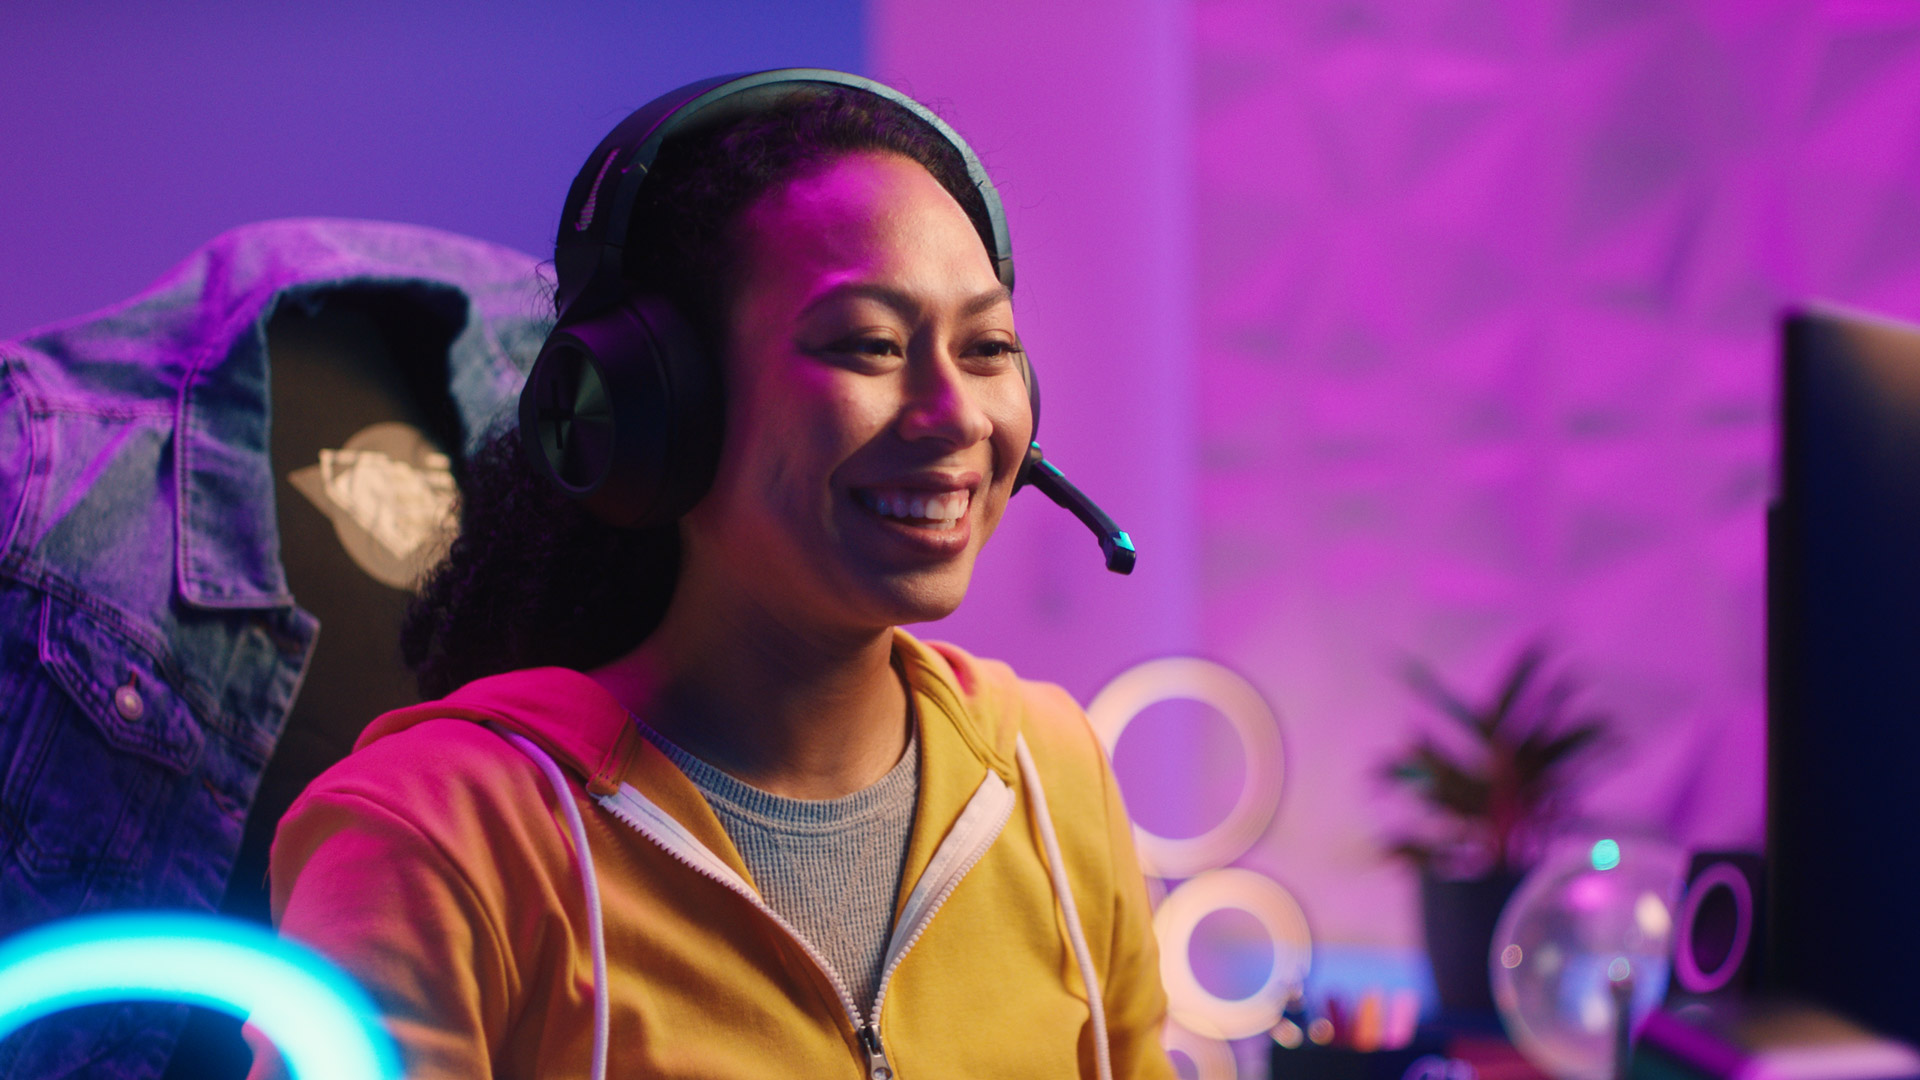 A young woman wears a gaming headset to play video games.